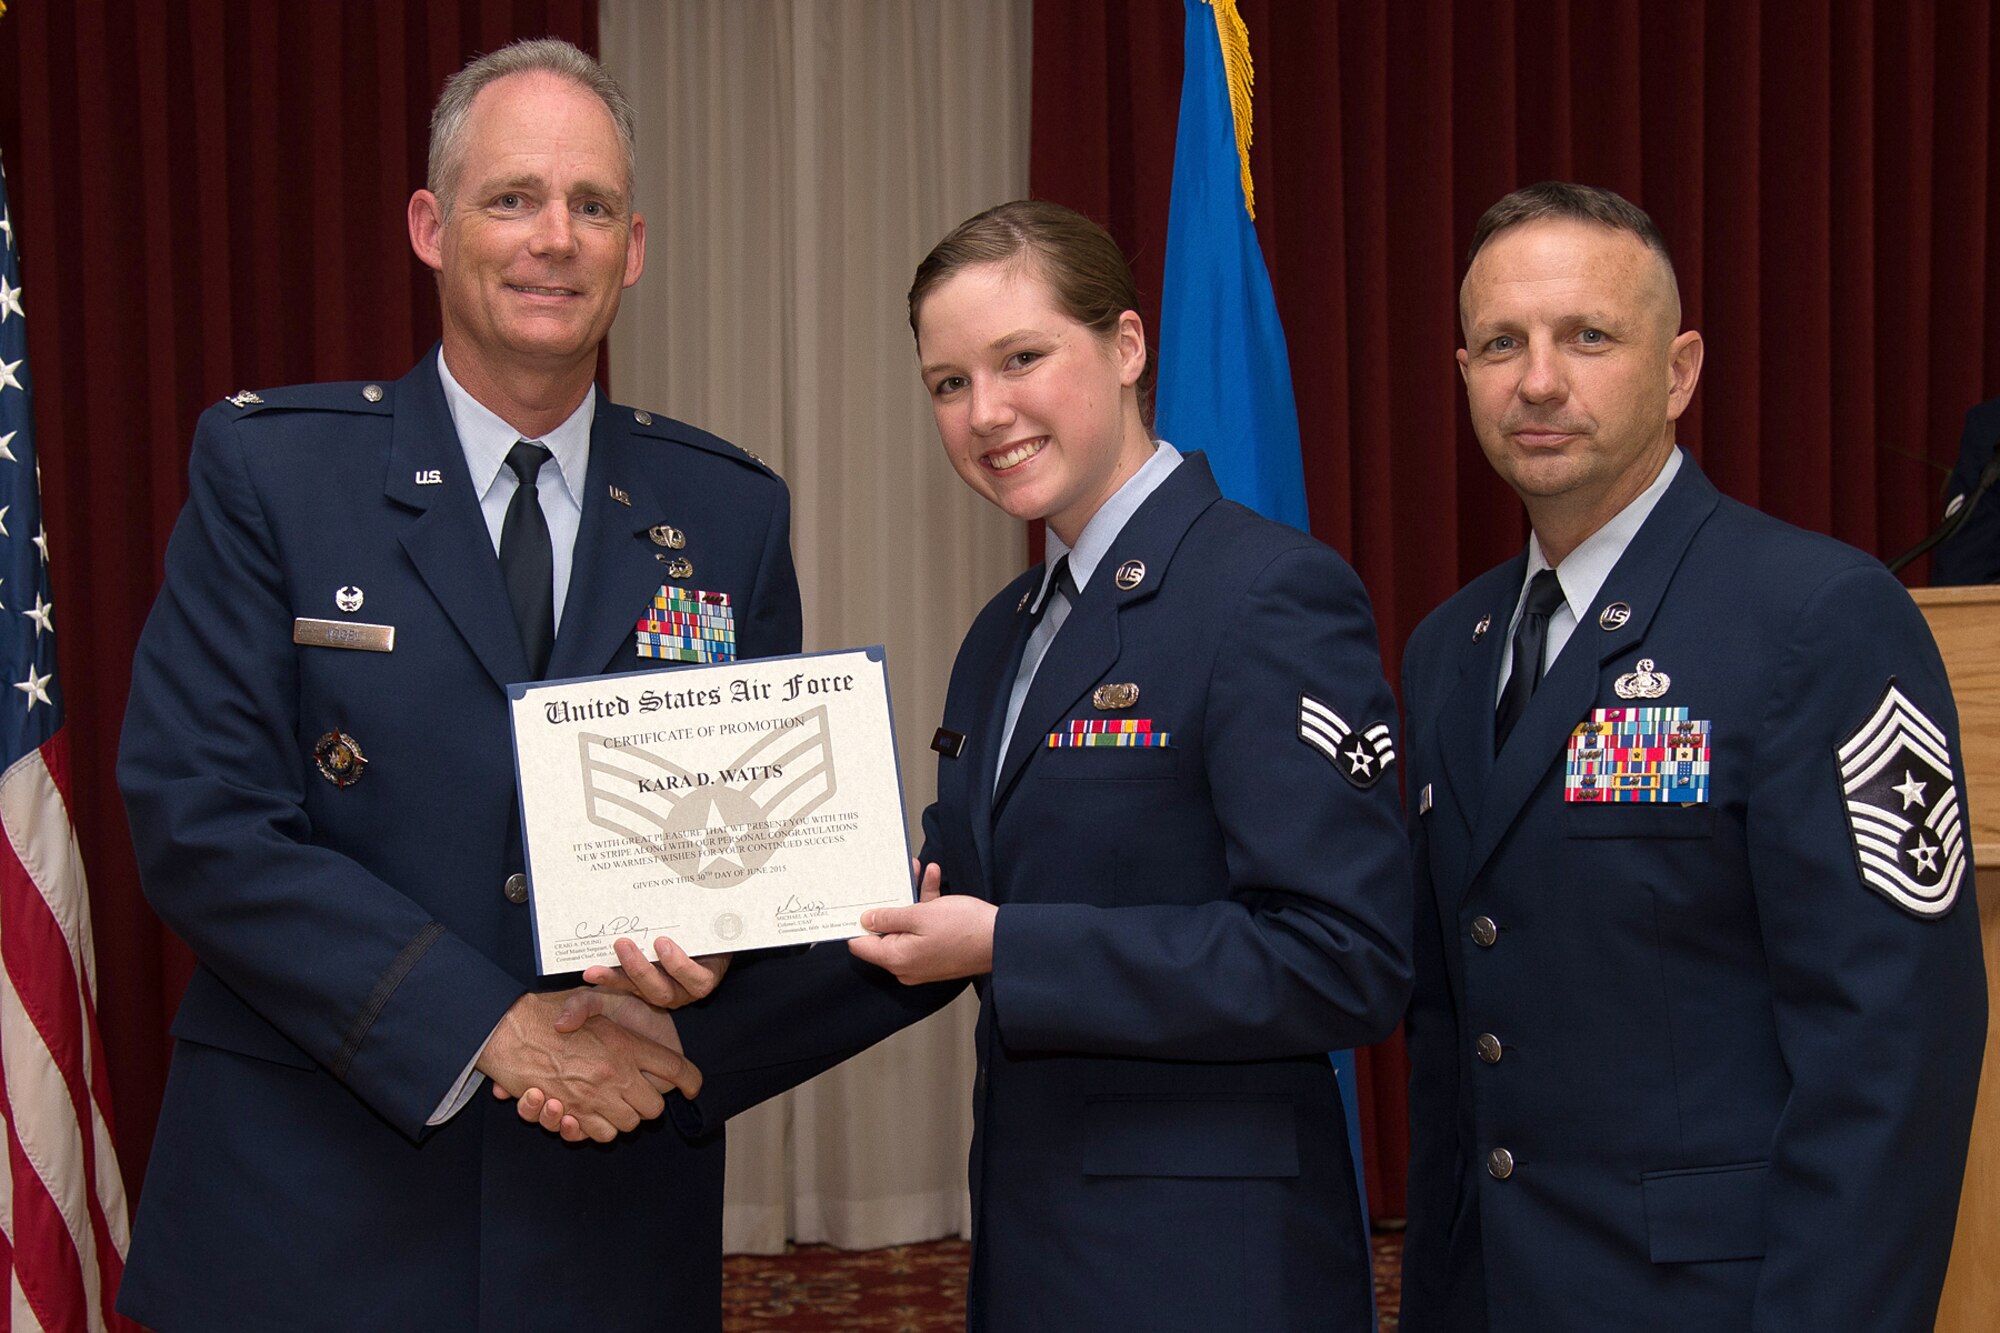 Col. Michael A. Vogel, 66th Air Base Group commander, Senior Airman Kara Watts, 66th Comptroller Squadron administration specialist, and Hanscom Command Chief Master Sgt. Craig A. Poling pose for a photo during the June enlisted promotion ceremony at the Minuteman Commons June 30. Watts was promoted to senior airman after learning she was selected below-the-zone earlier in the month. (U.S. Air Force photo by Mark Herlihy)